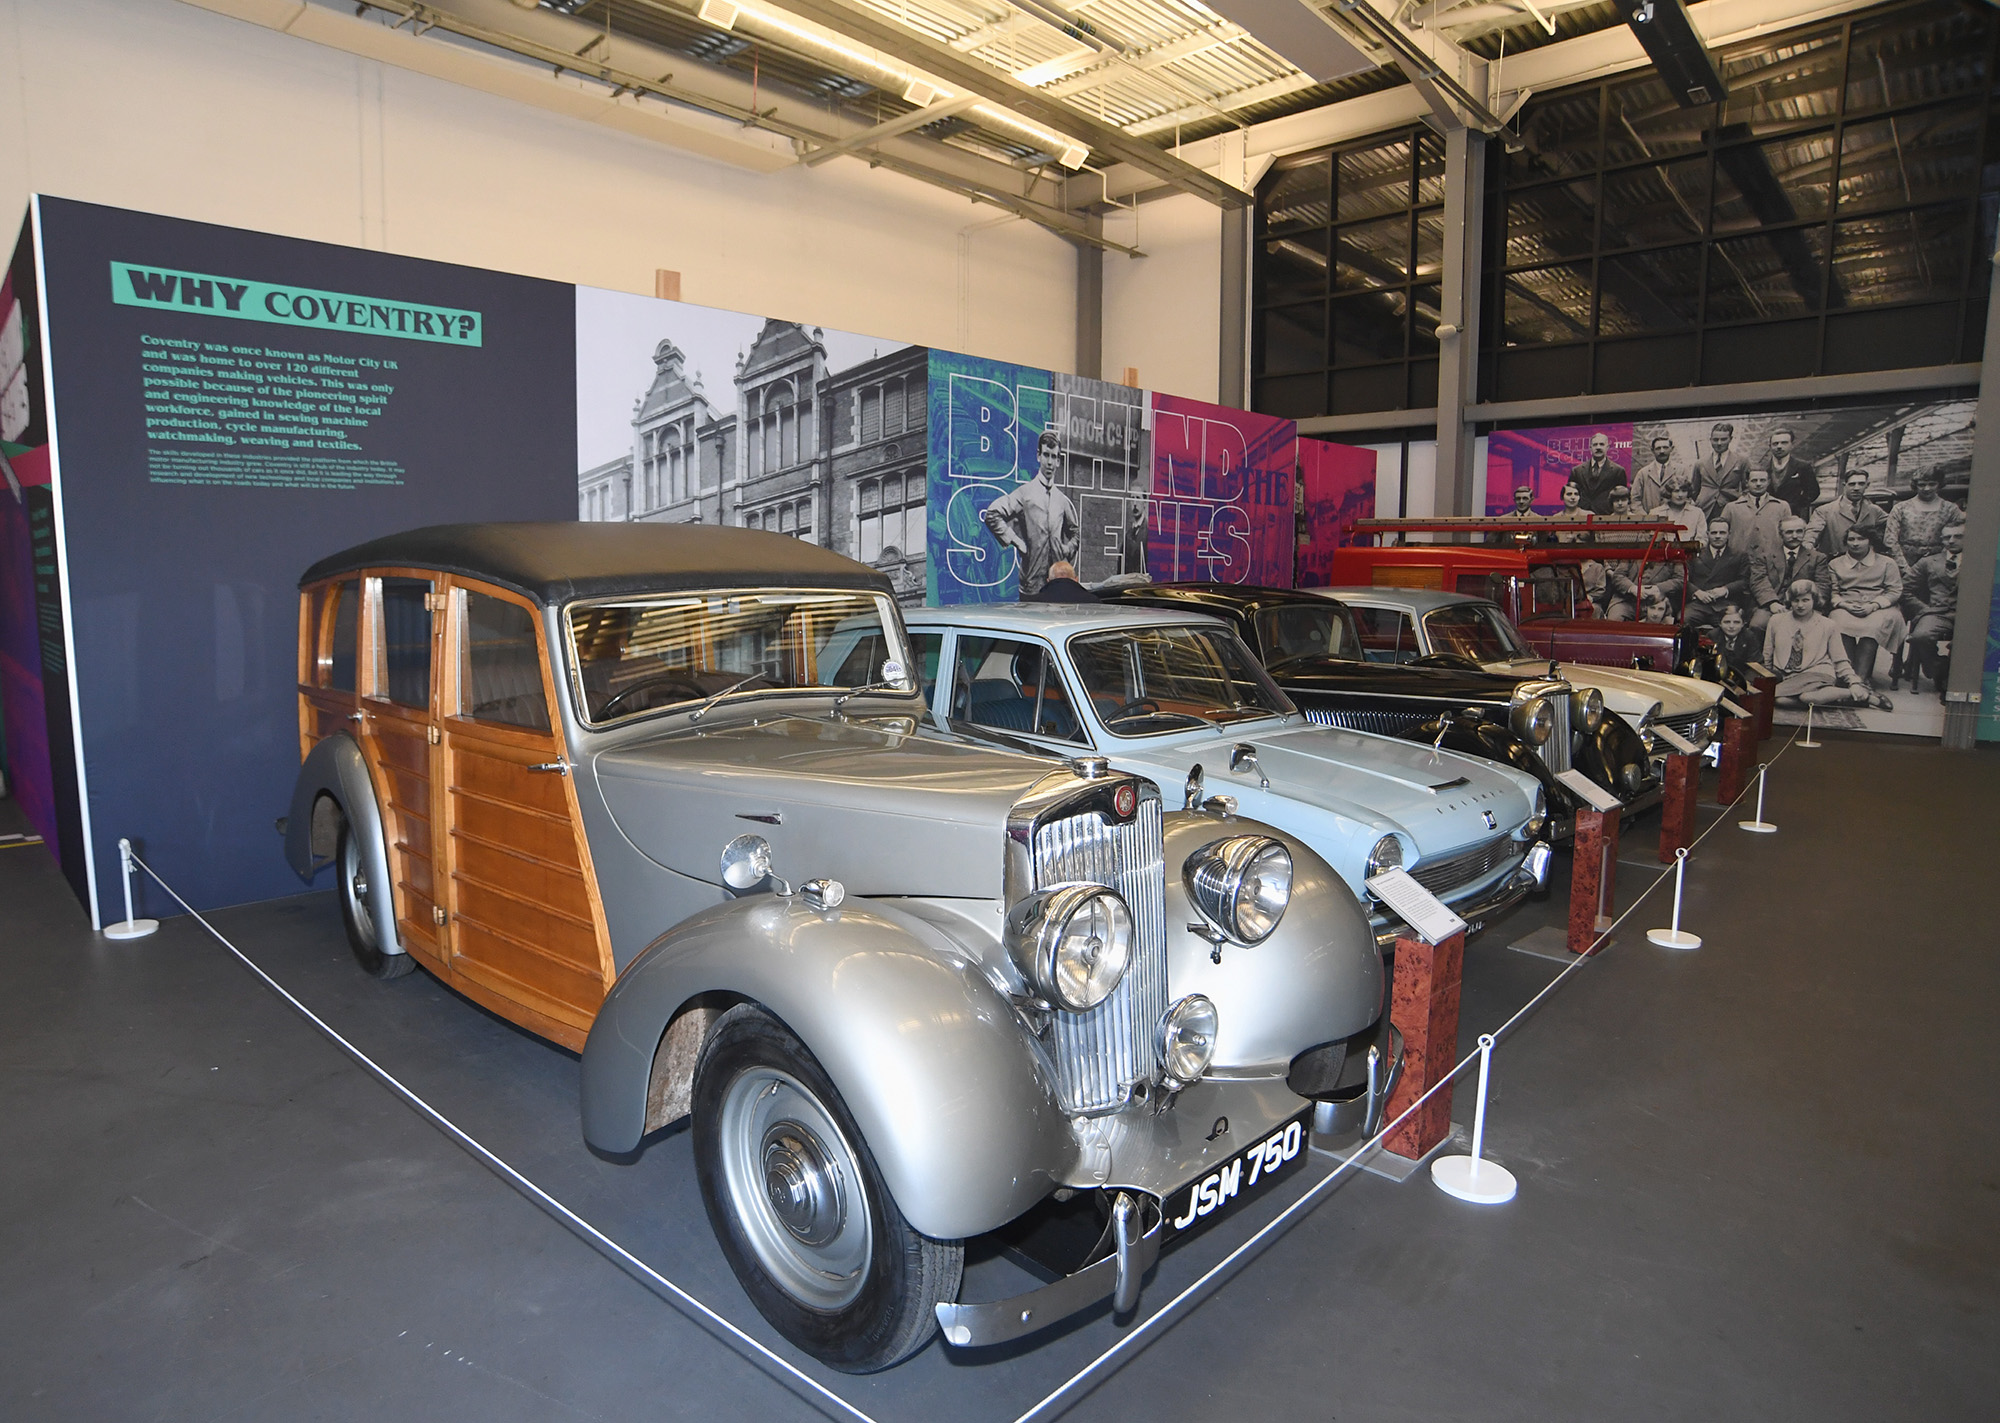 A selection of cars on display including a wooden-bodied Lea Francis estate in the foreground. A display board behind the cars features archive imagery of factory workers and the headlines, "Behind the Scenes" and "Why Coventry?"